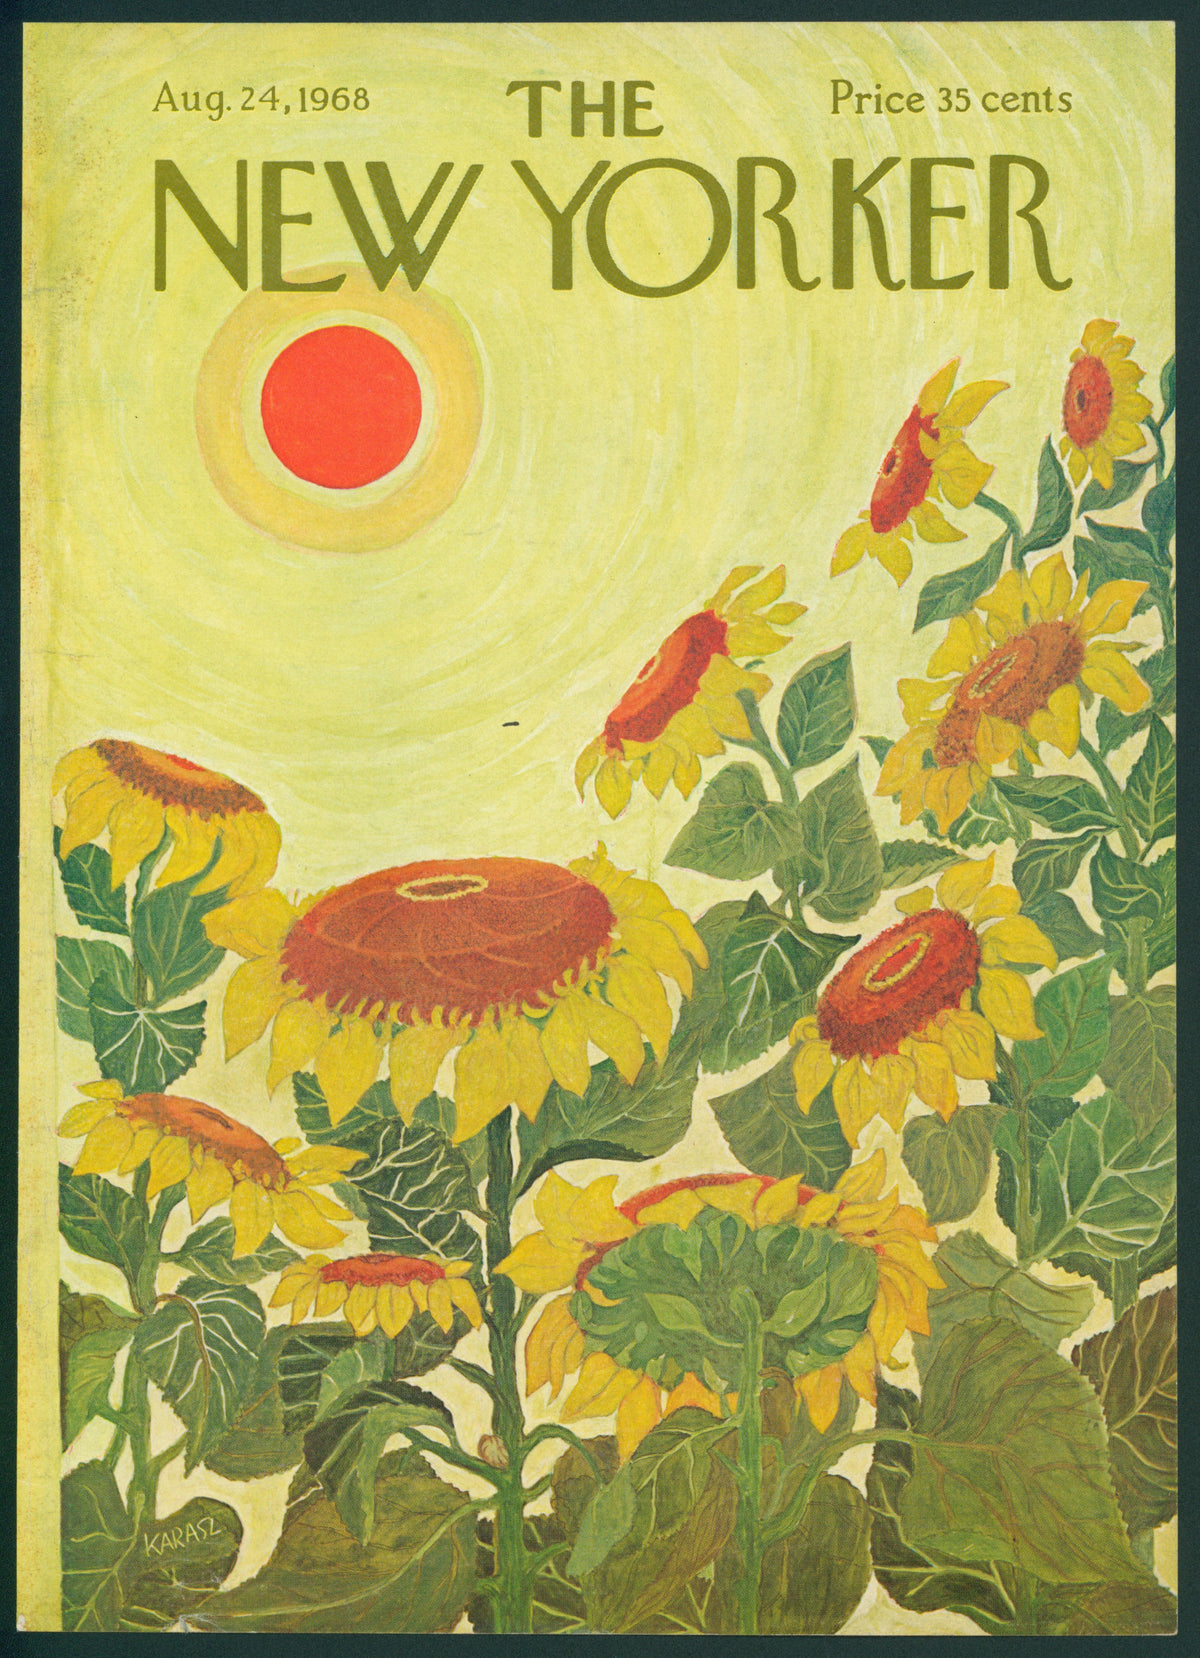 Summer Sunflowers- The New Yorker - Authentic Vintage Antique Print